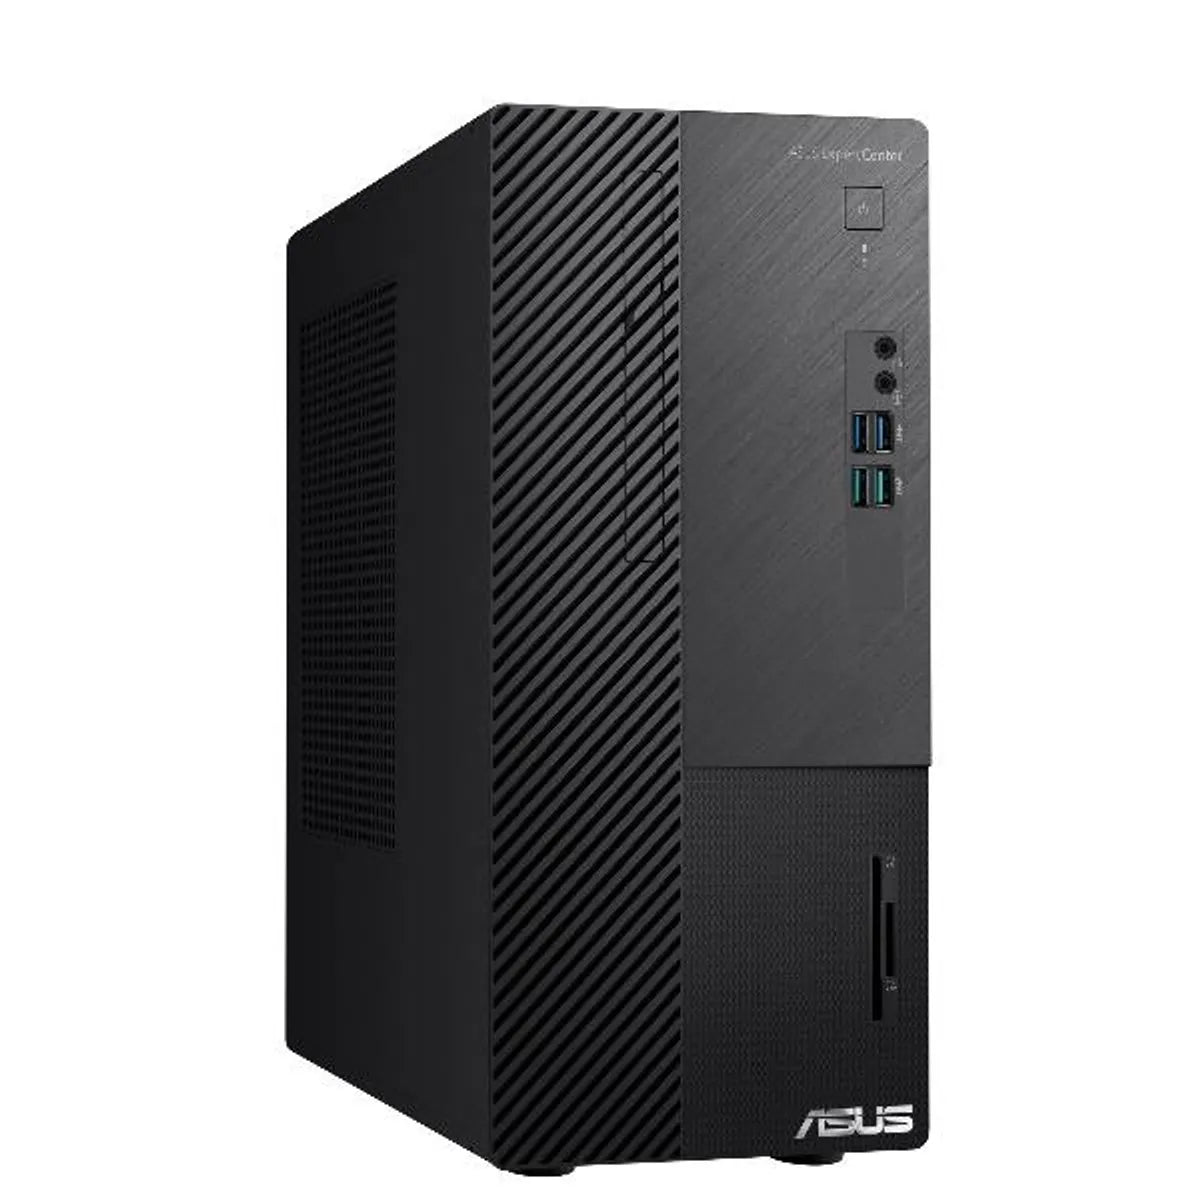 ASUS PC TOWER ExpertCenter D5 i7-12700 16GB 512GB SSD WIN 11 PRO